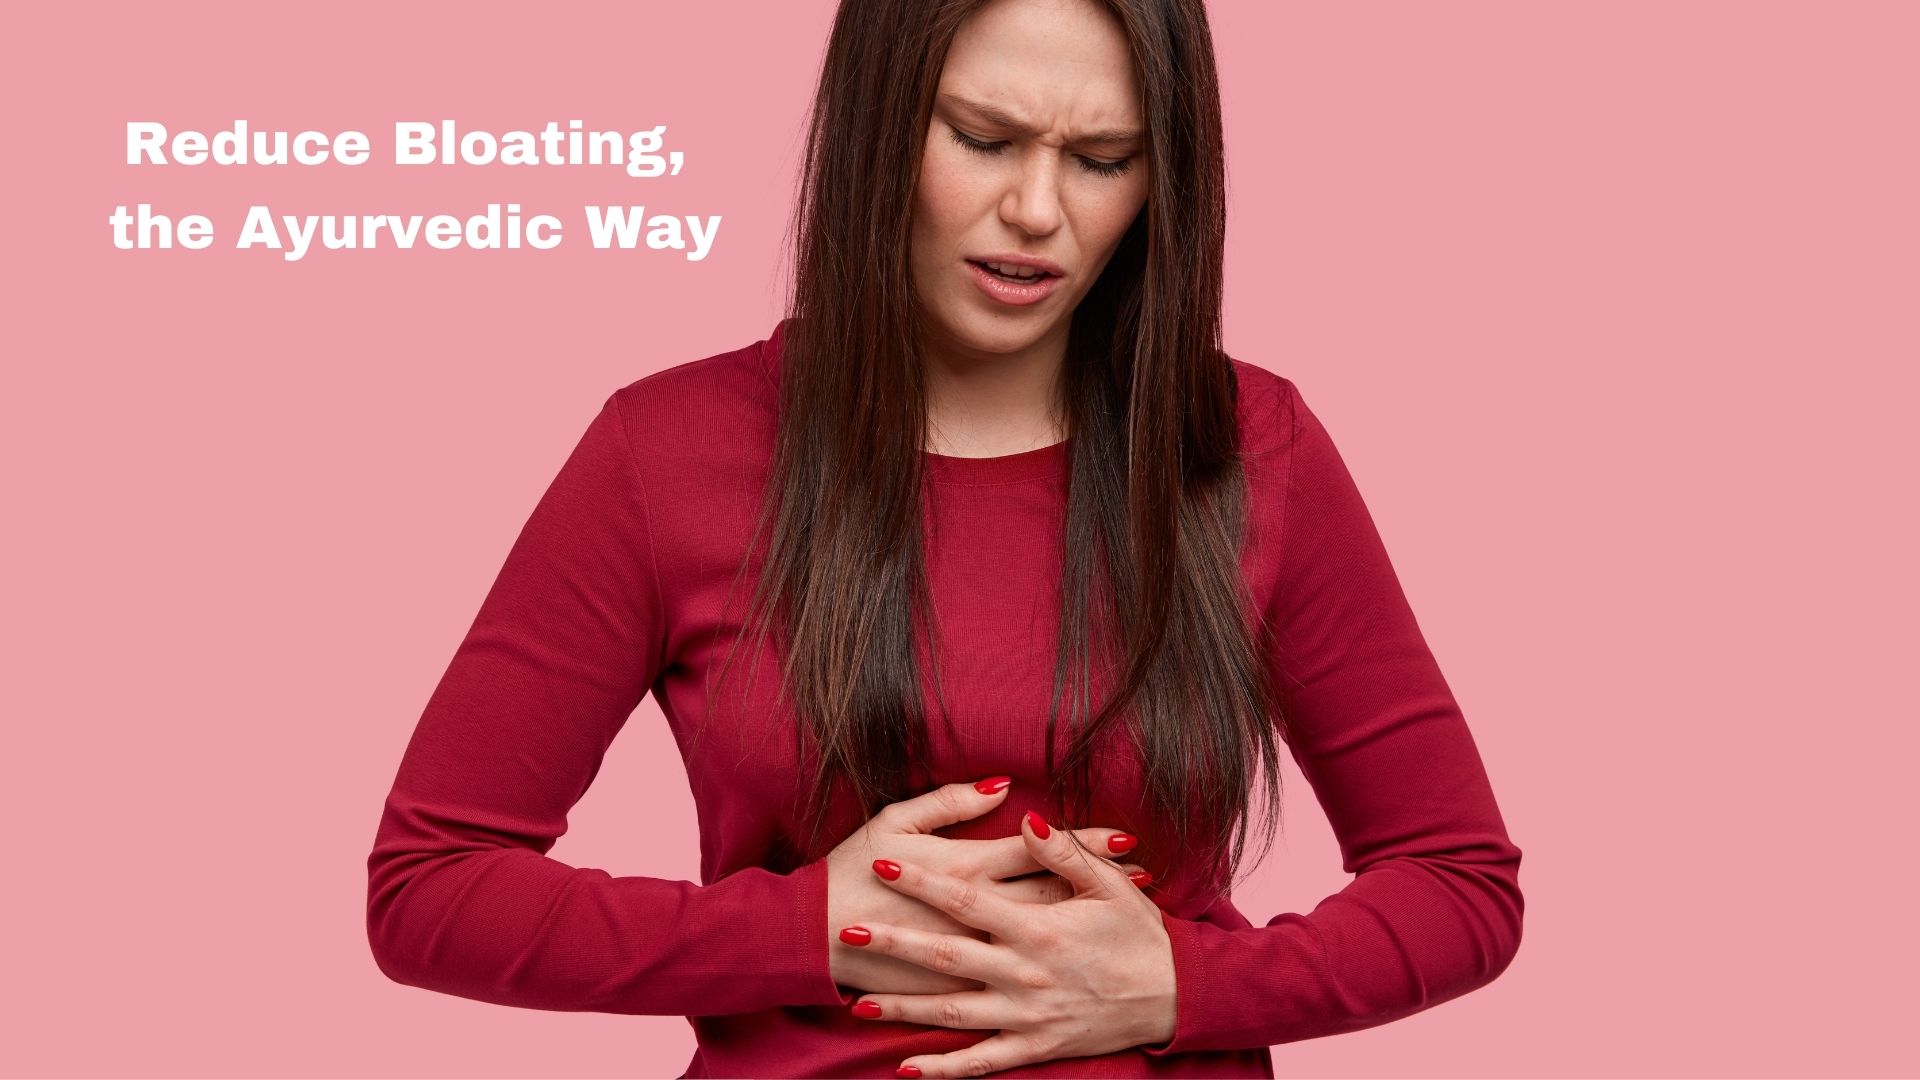 Period Bloating: Remedies and How to Manage